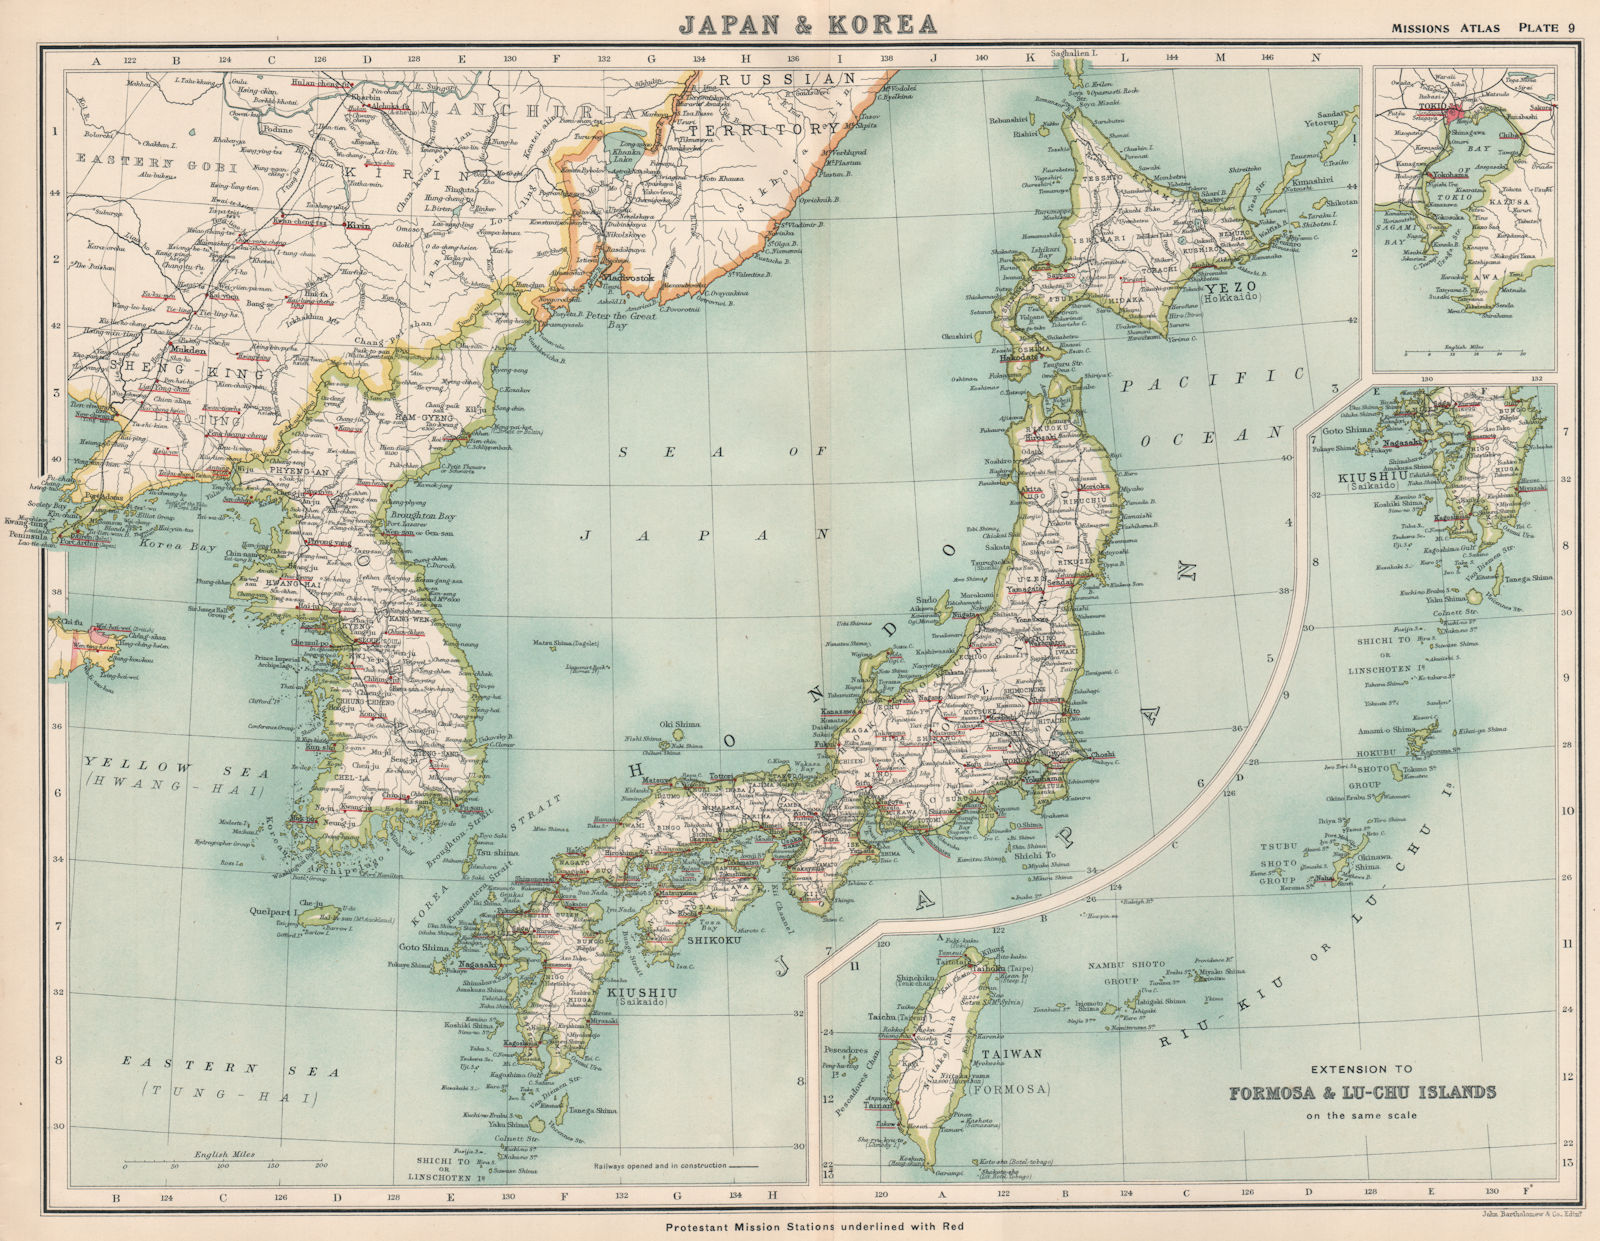 JAPAN & KOREA PROTESTANT MISSION STATIONS. Christian Missionary work 1911 map